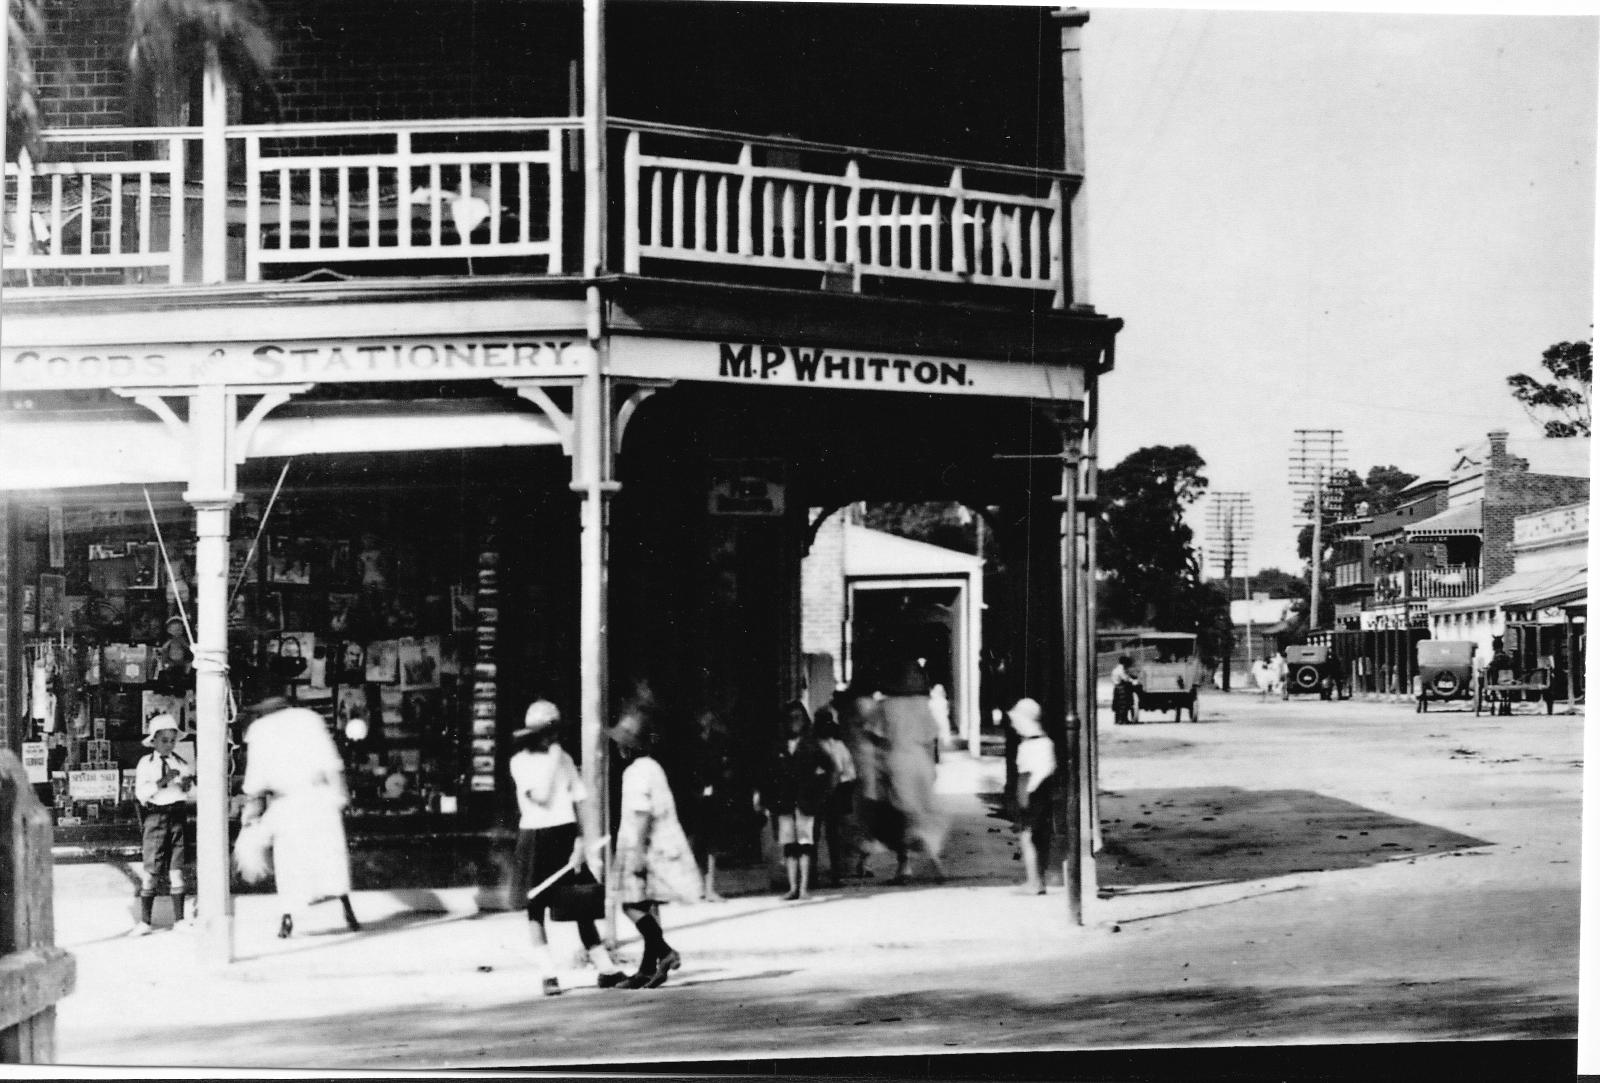 Whittons General store, cnr Queen & Prince St., Whitton migrated from England 1911, came to Busselton from Perth 1920's